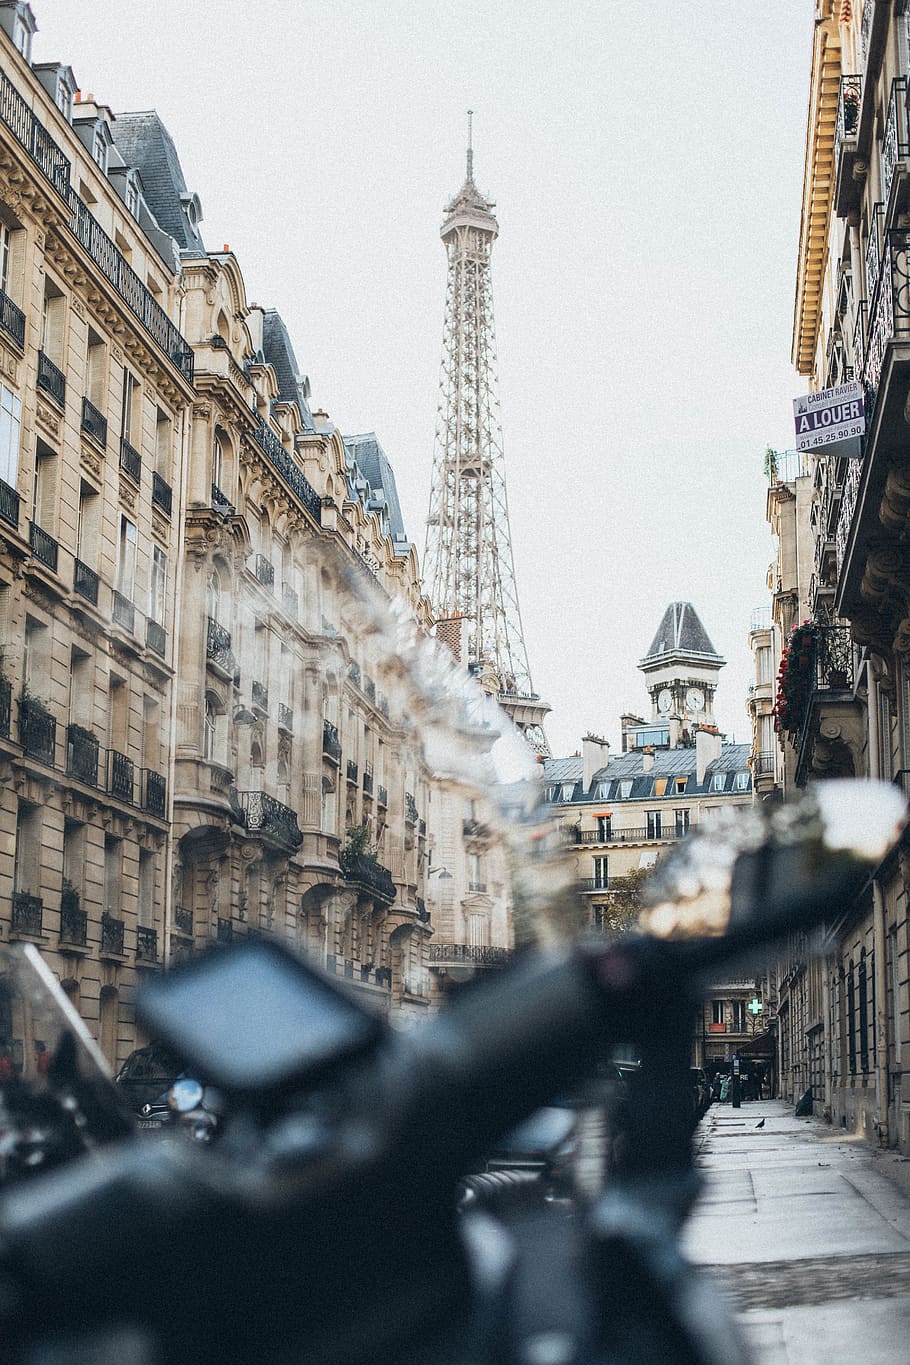 HD wallpaper: Selective Focus Photography of Eiffel Tower, architecture, blur